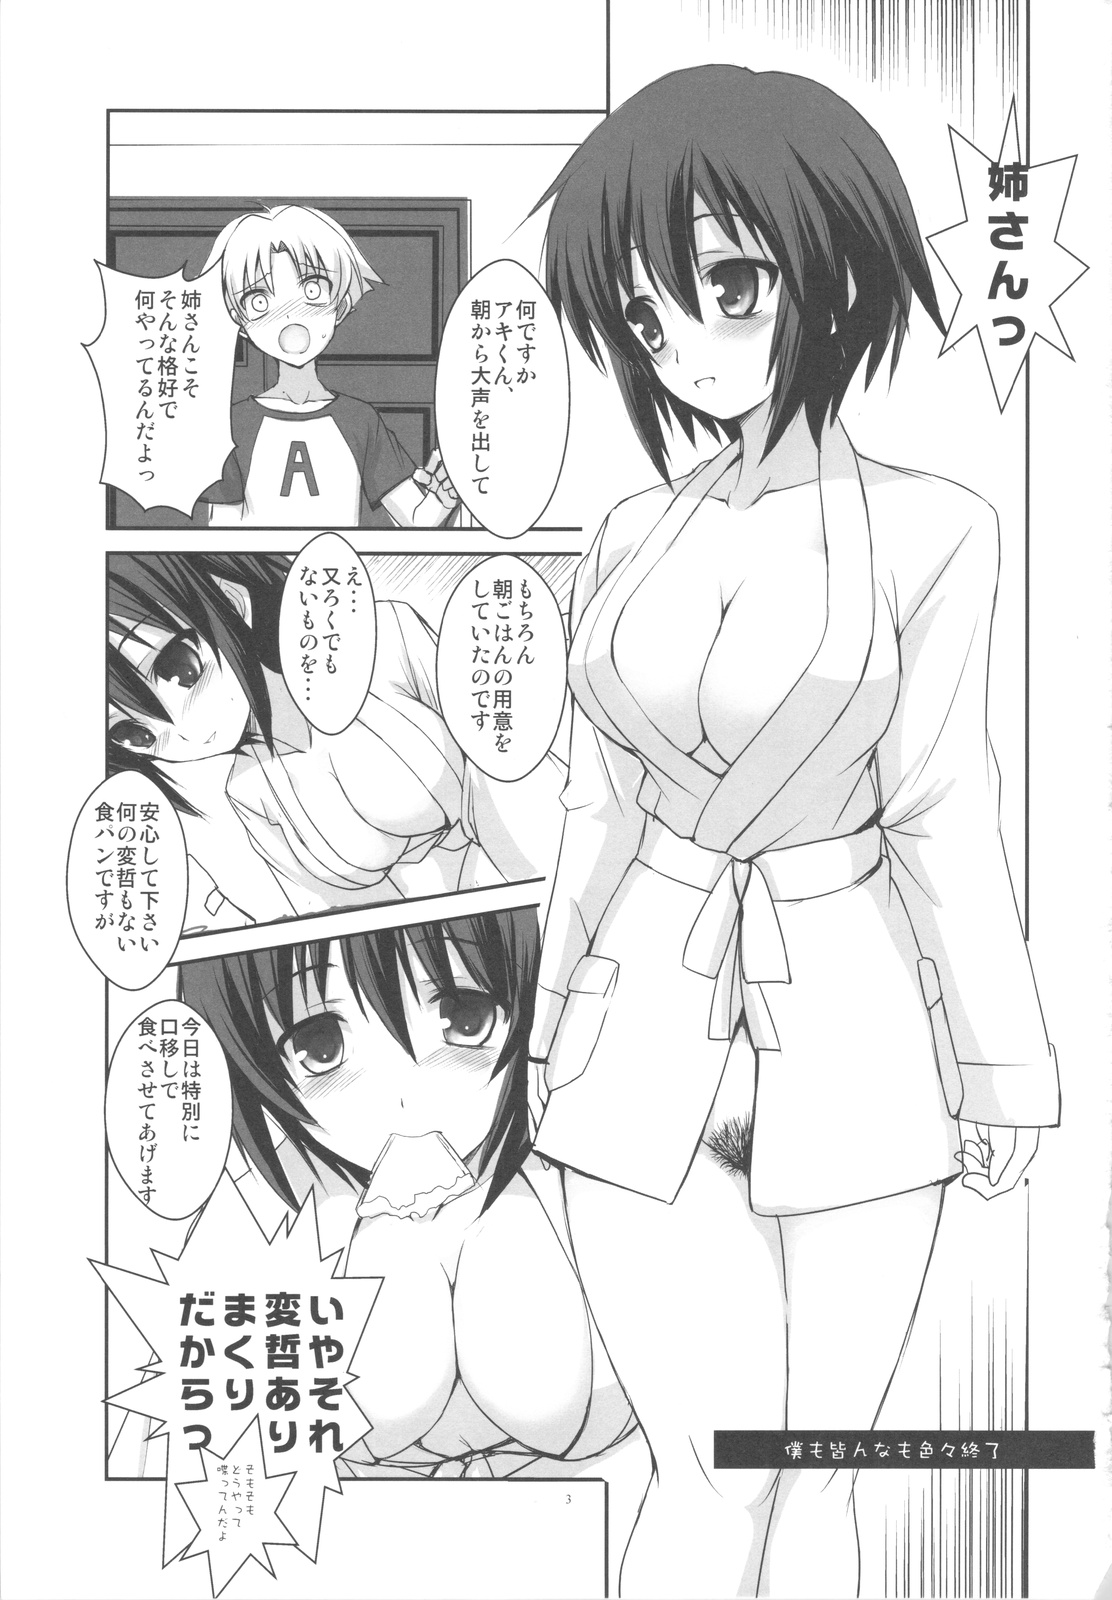 (COMIC1☆4) [R-WORKS] LOVE IS GAME OVER (Baka to Test to Shoukanjuu) page 3 full